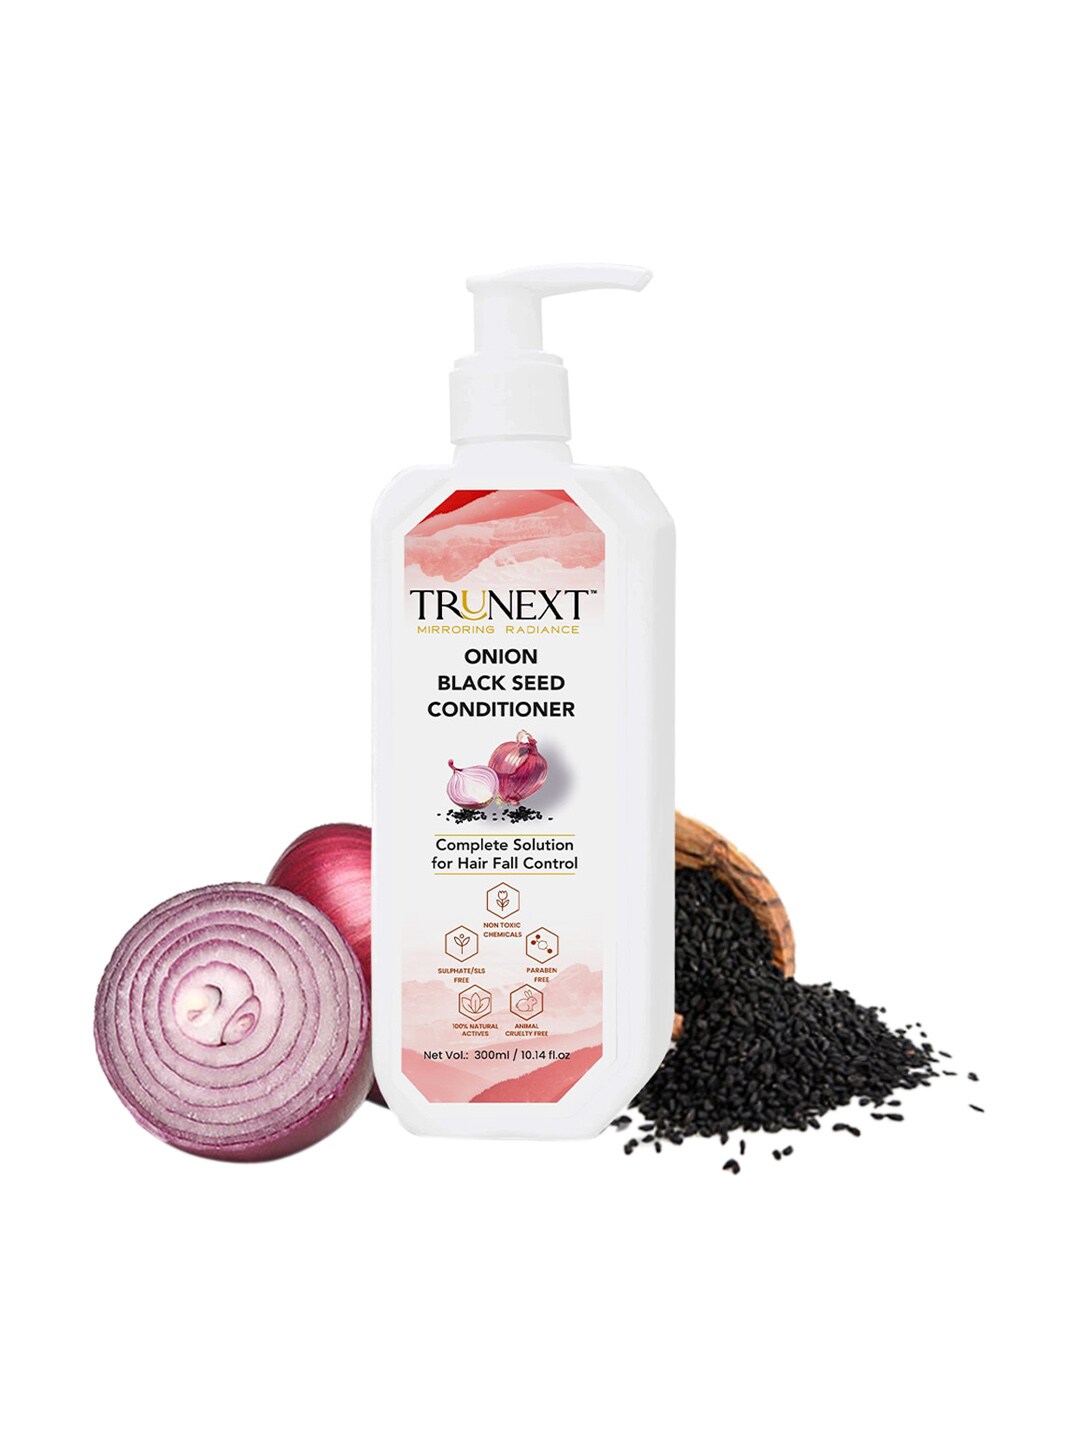 TRUNEXT Onion Black Seed Hair Conditioner 300 ml Price in India